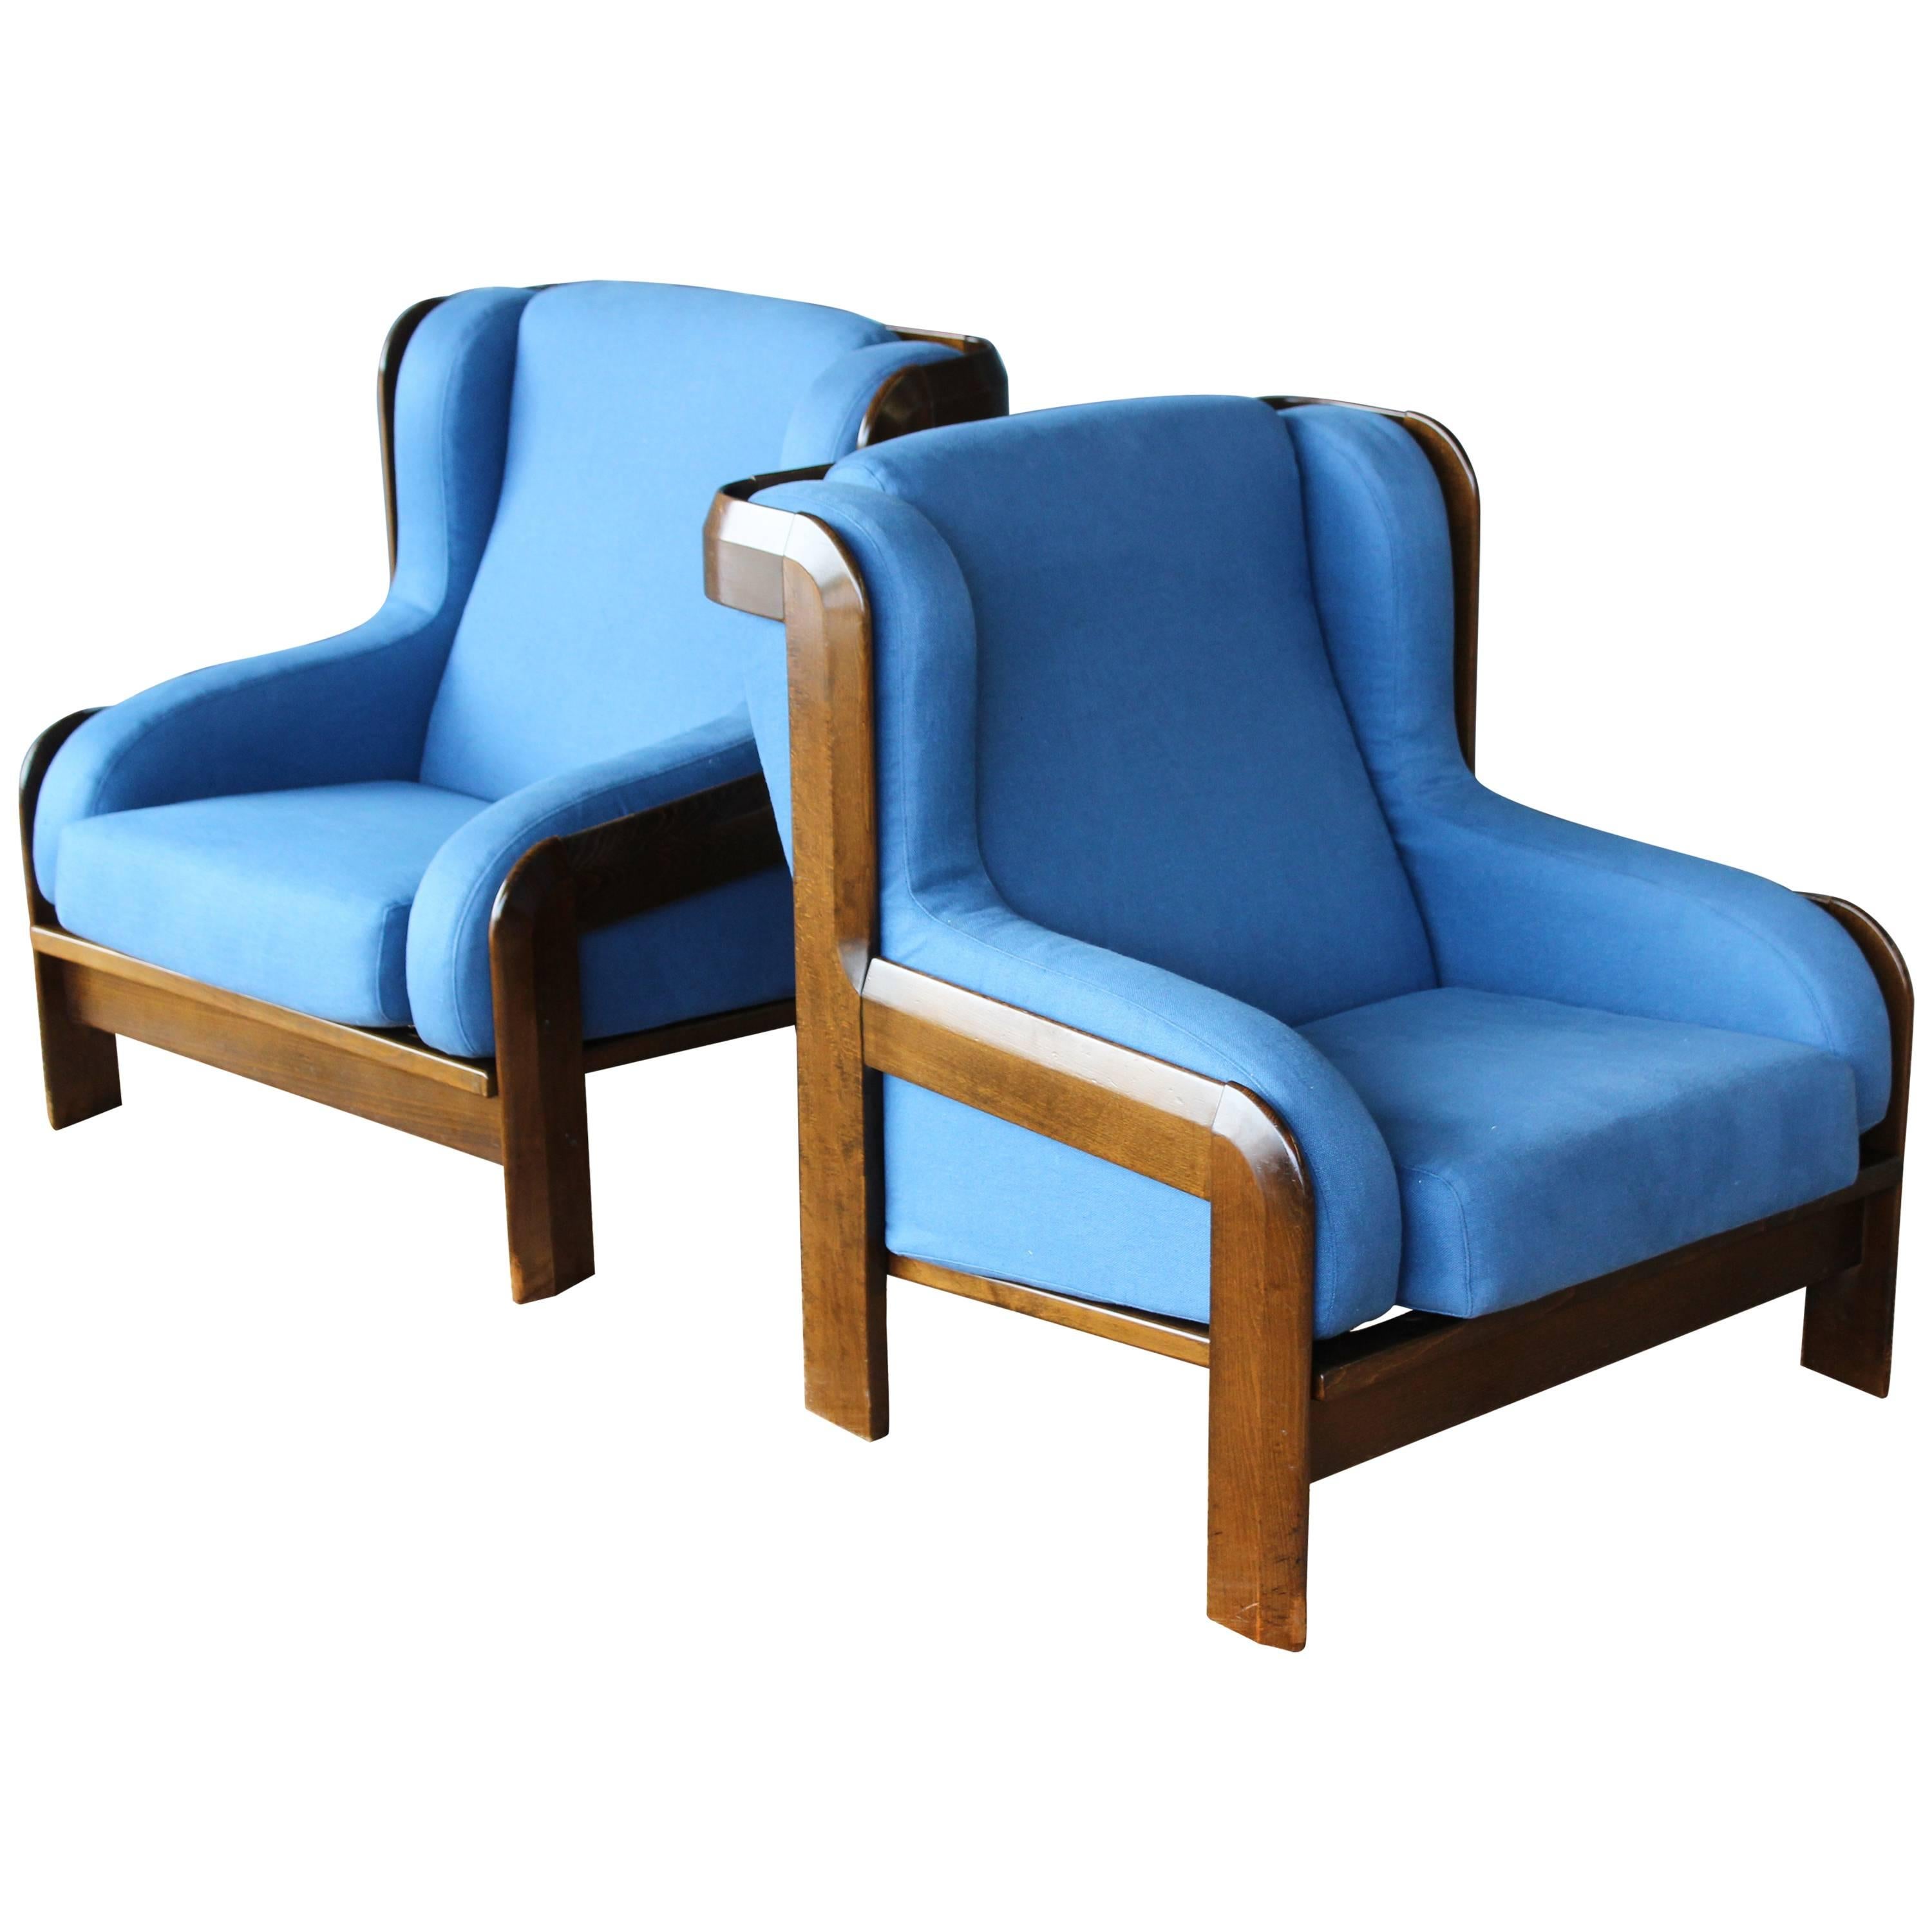 Pair of Armchairs by Sillas Guilleumas, Spain, 1970s